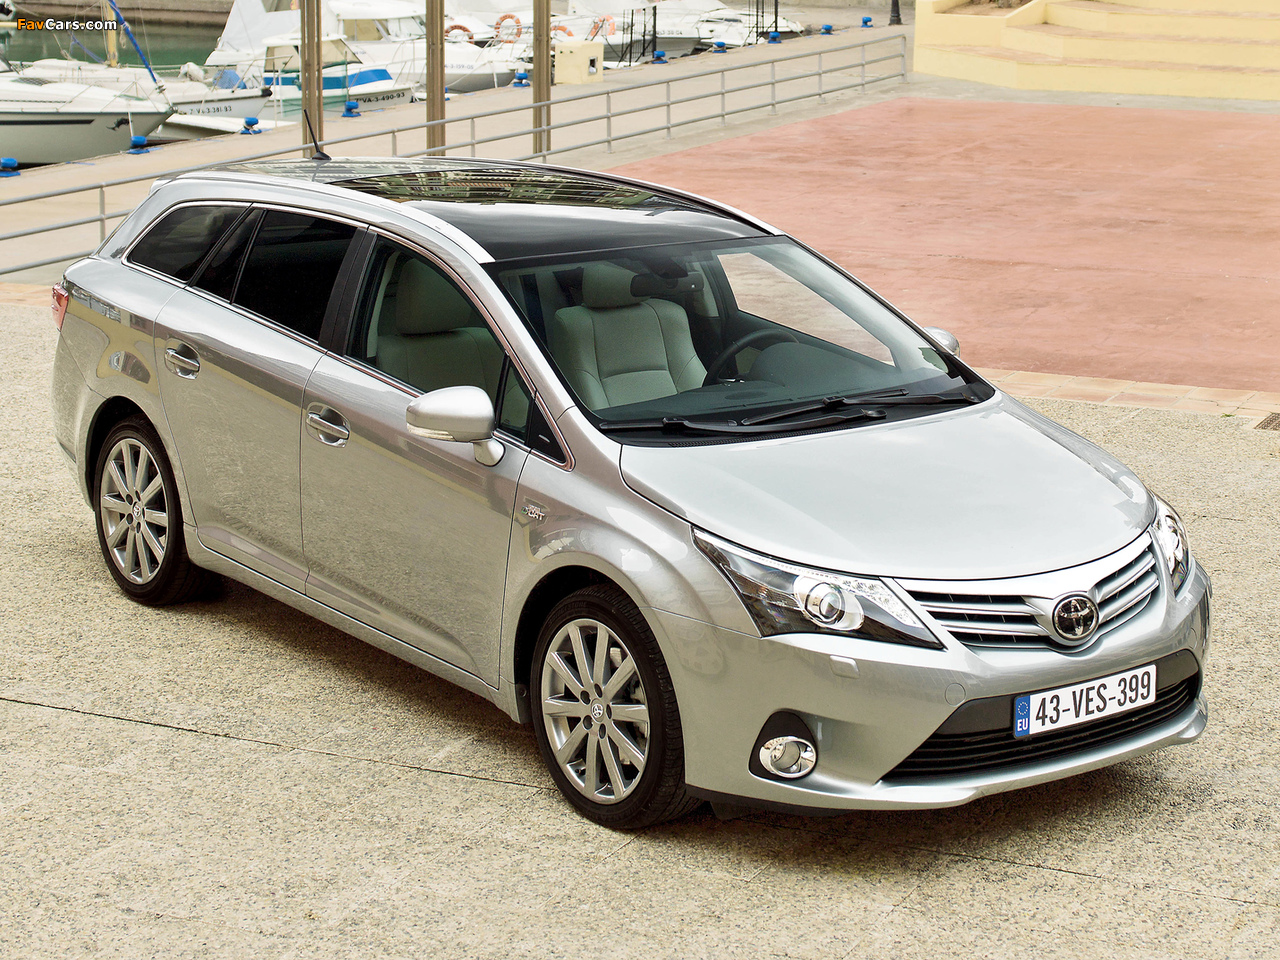 Toyota Avensis Wagon 2011 pictures (1280 x 960)